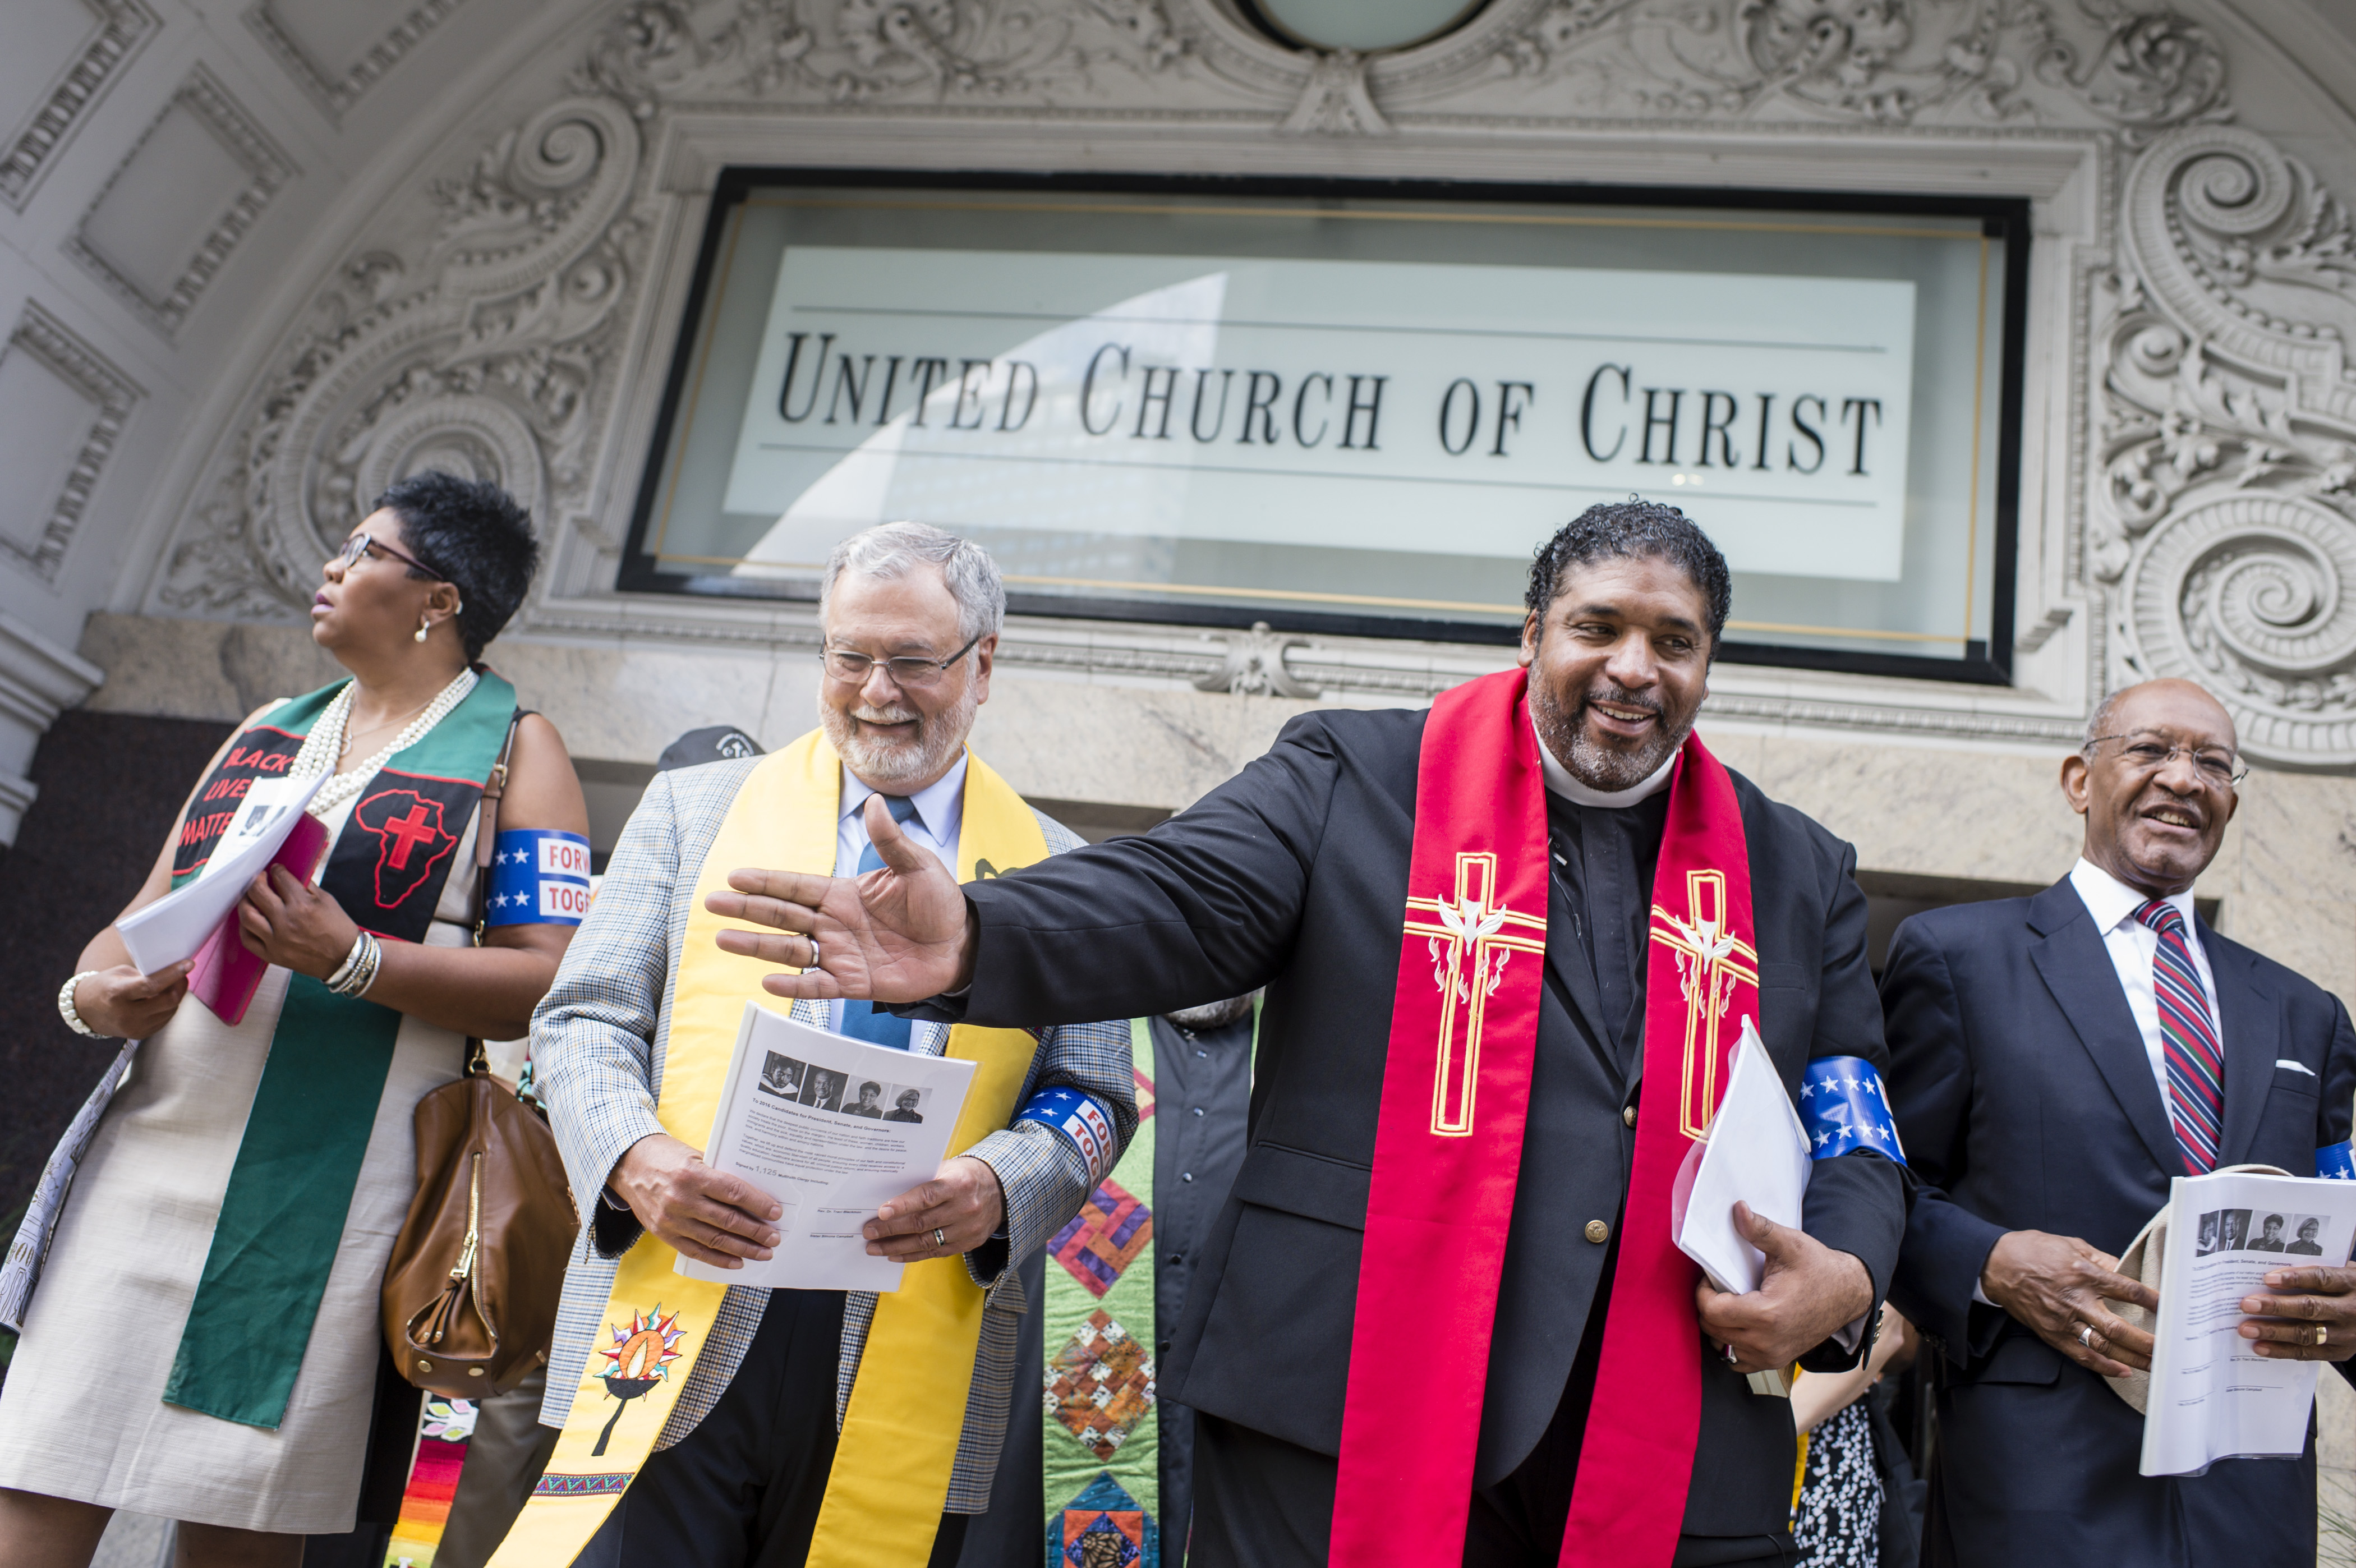 Faith Leaders Revive MLK’s ‘Poor People’s Campaign’ 50 Years Later